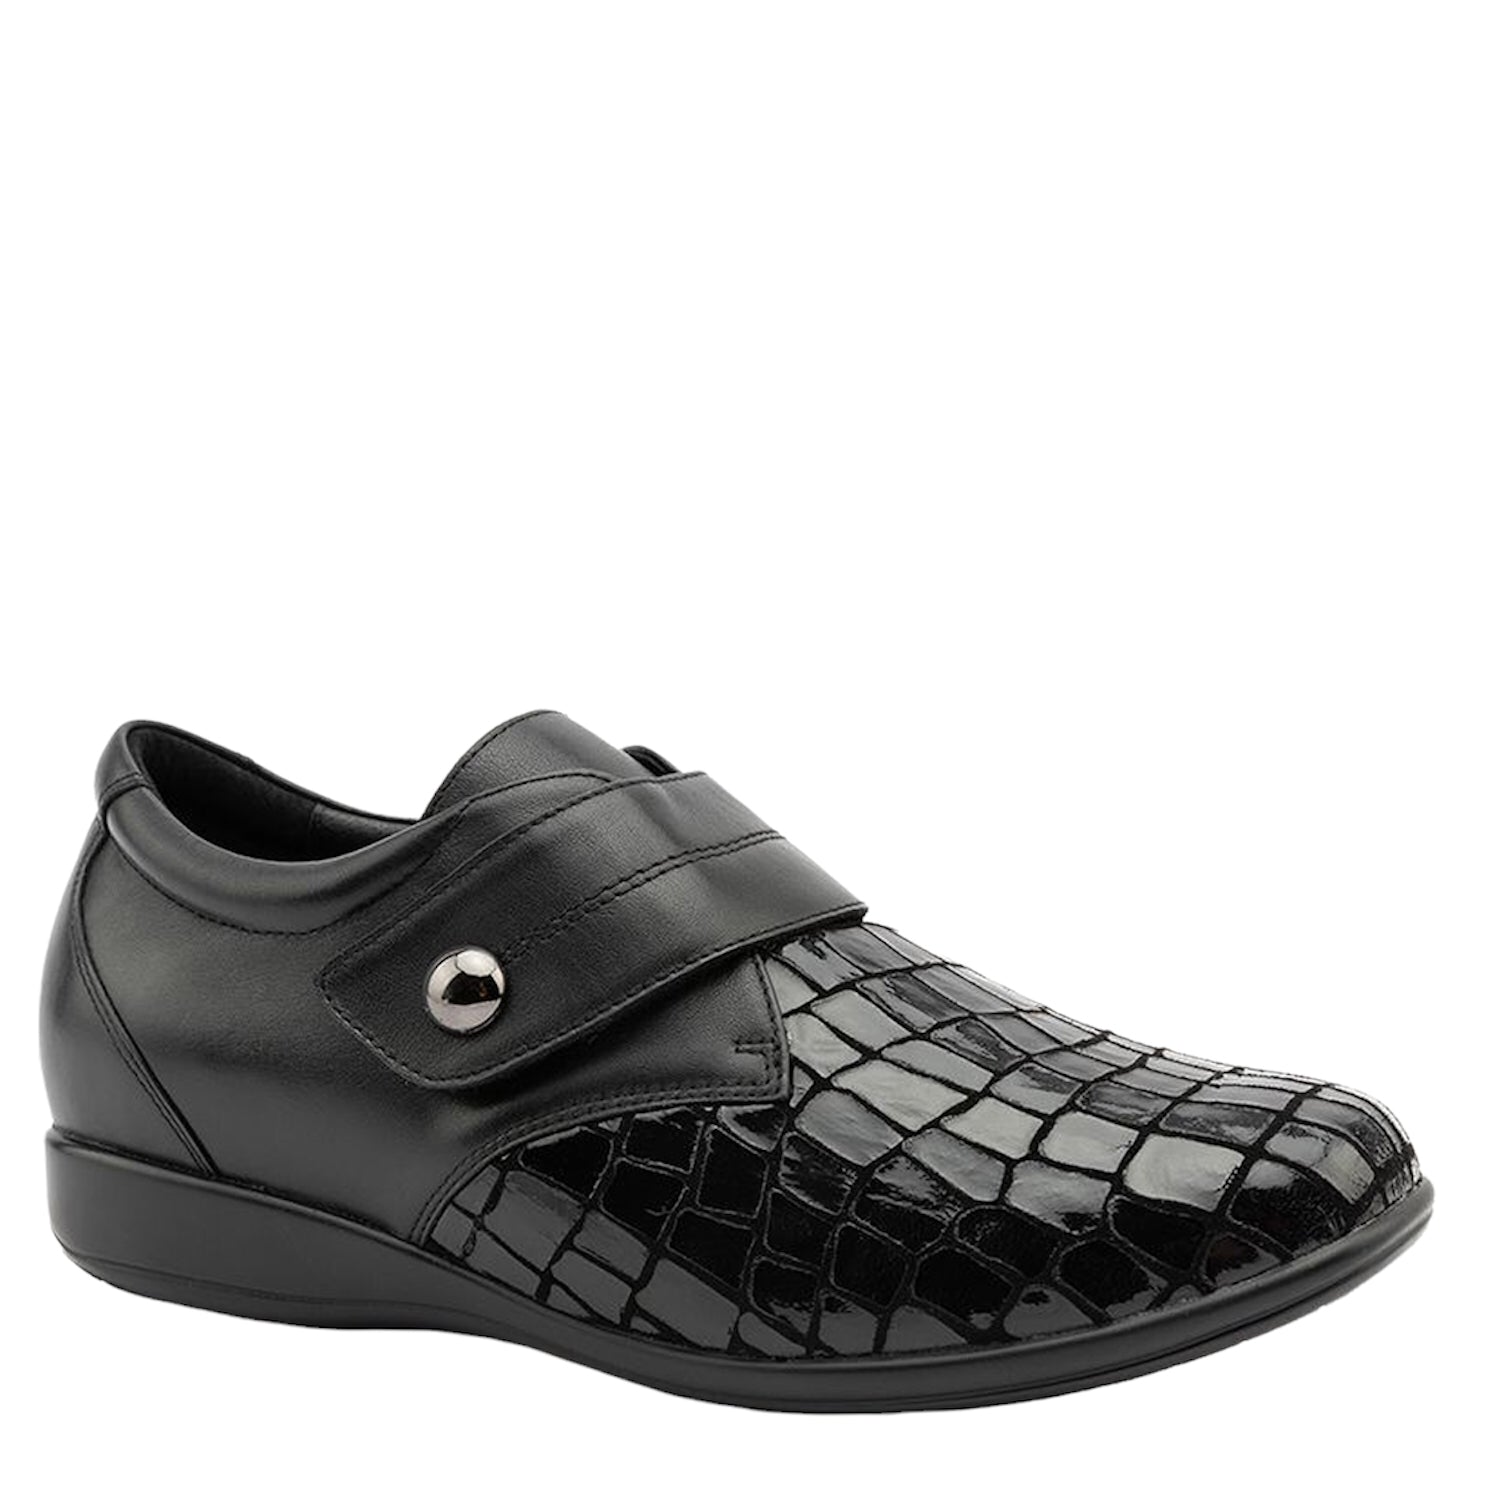 Shop WHISPER - BLACK CROC STRETCH FS by KLOUDS - Ian's Shoes for Women